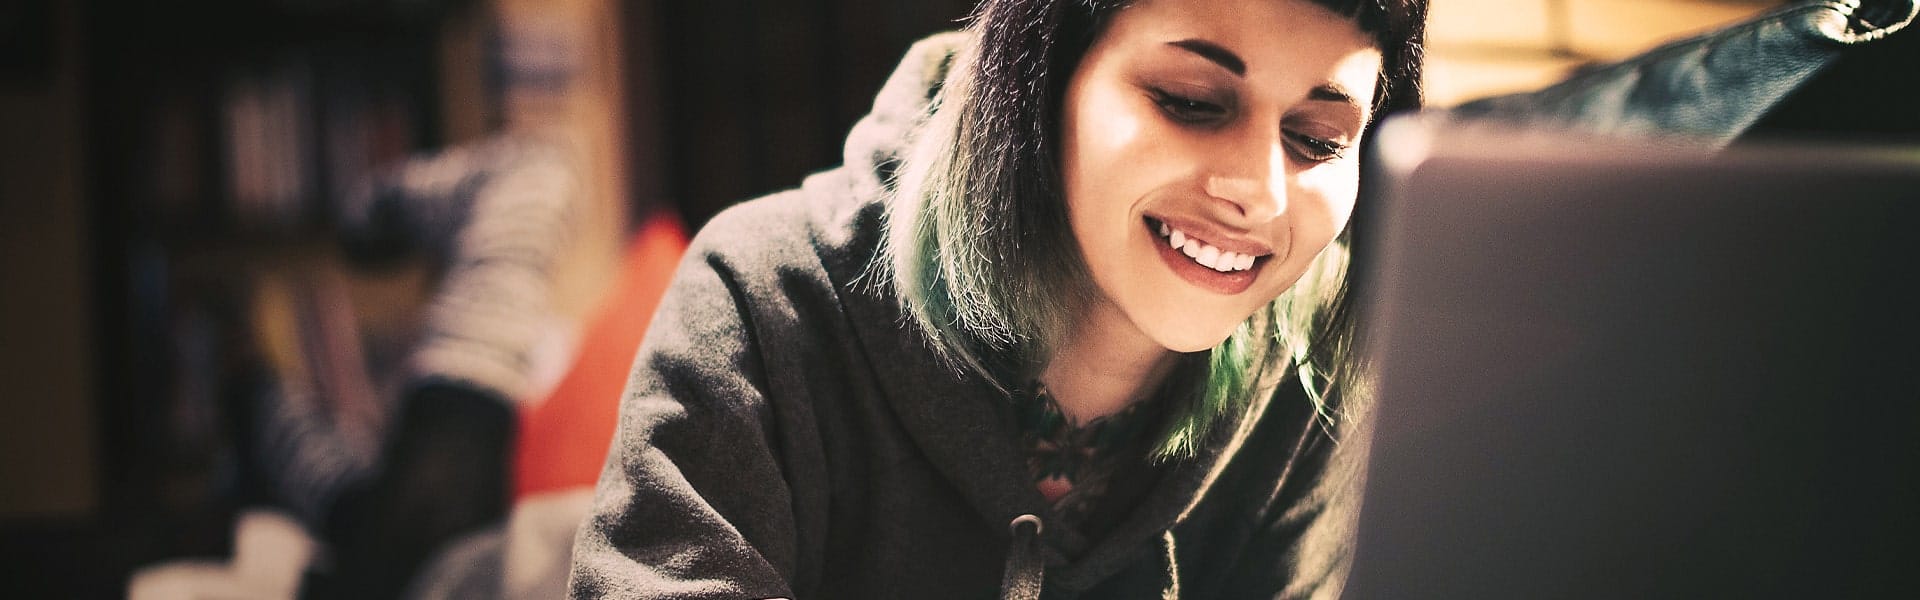 young woman with green hair on her laptop